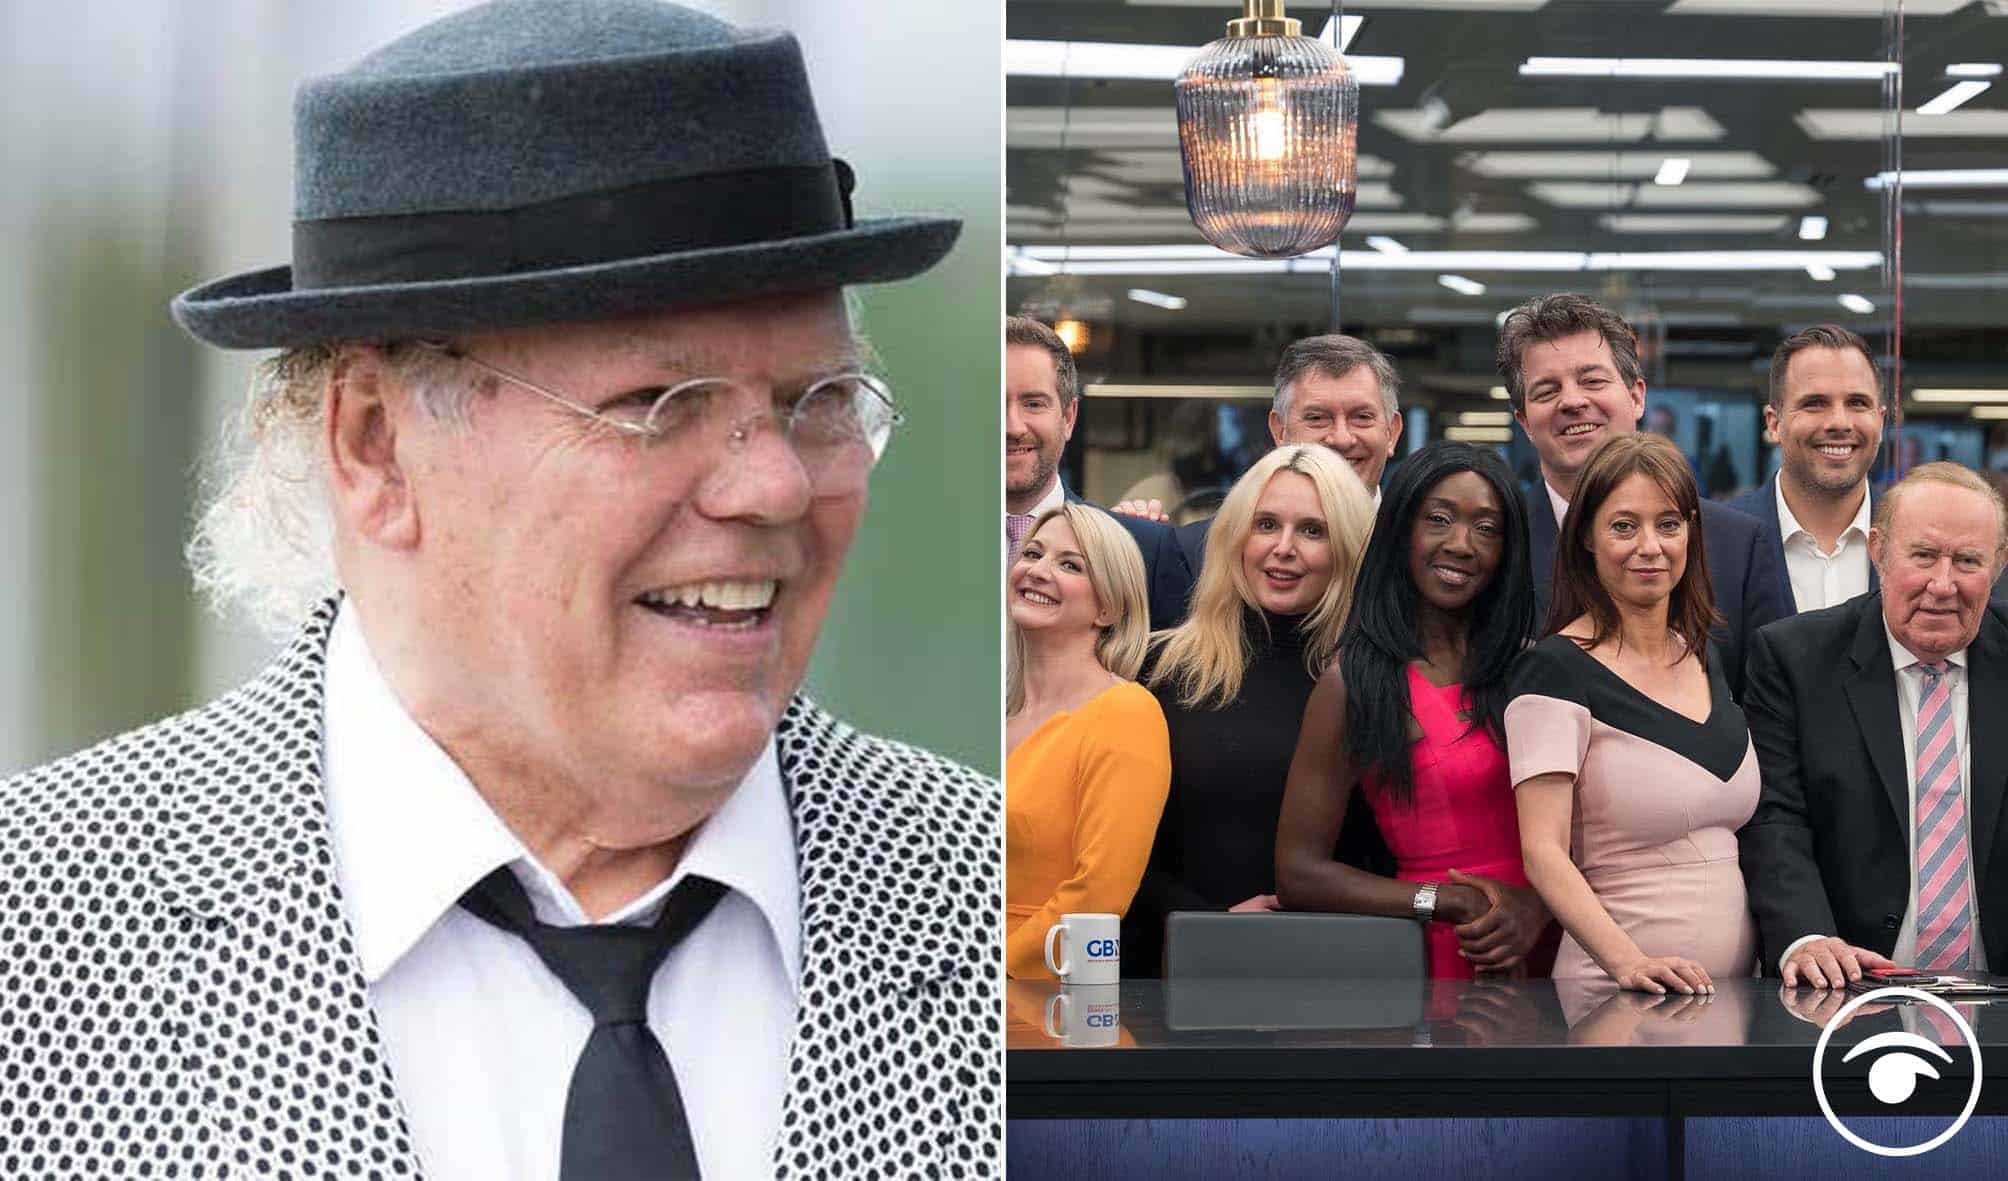 Roy Chubby Brown’s gig cancelled and some people see funny side – GB News don’t